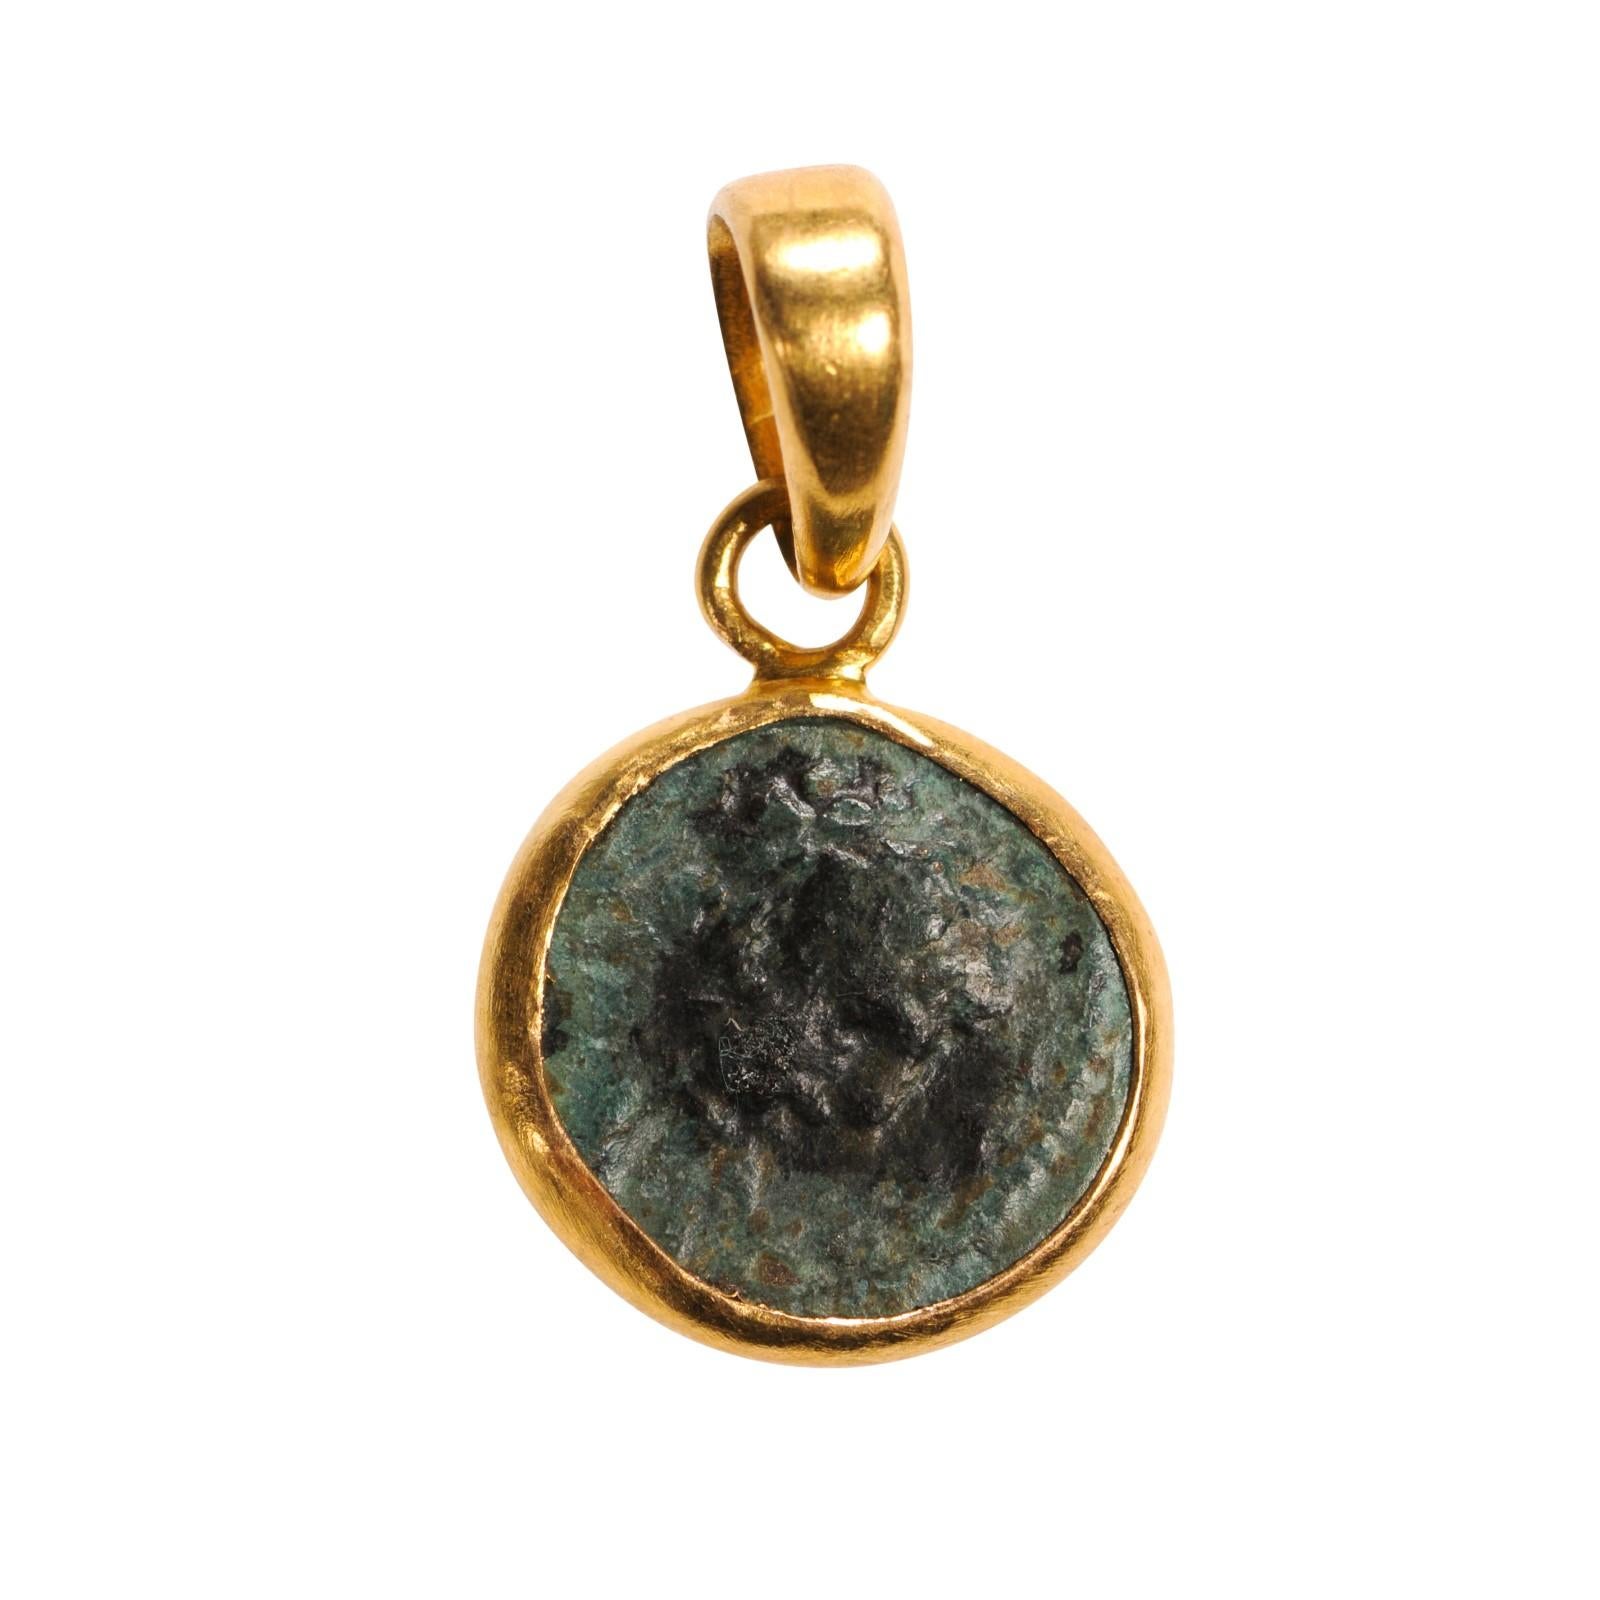 Classical Roman Roman Coin & Pyrite Necklace (pendant only) For Sale